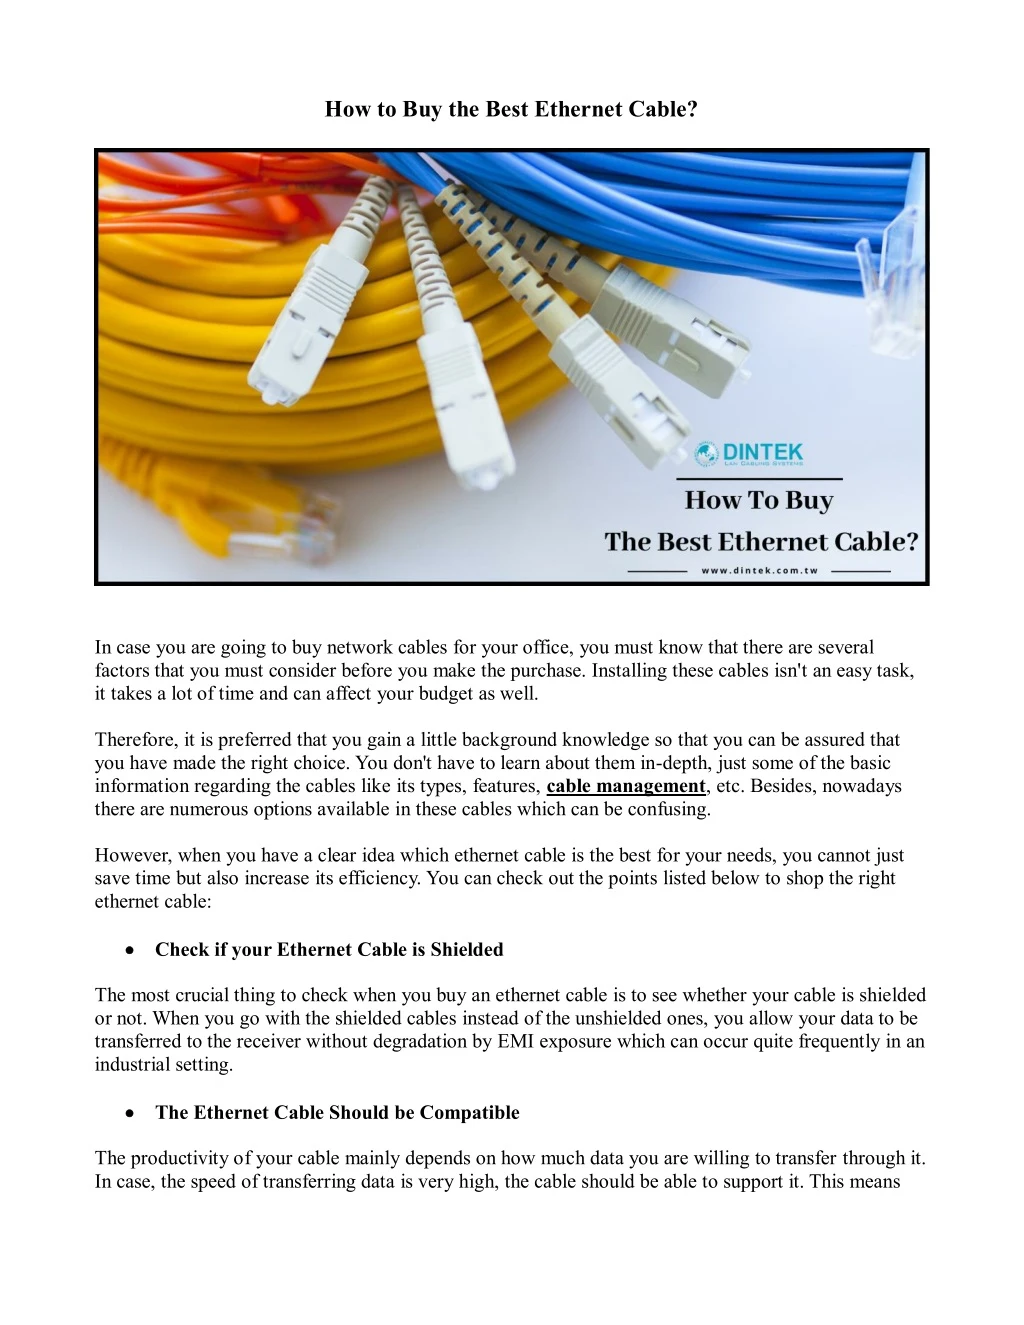 how to buy the best ethernet cable